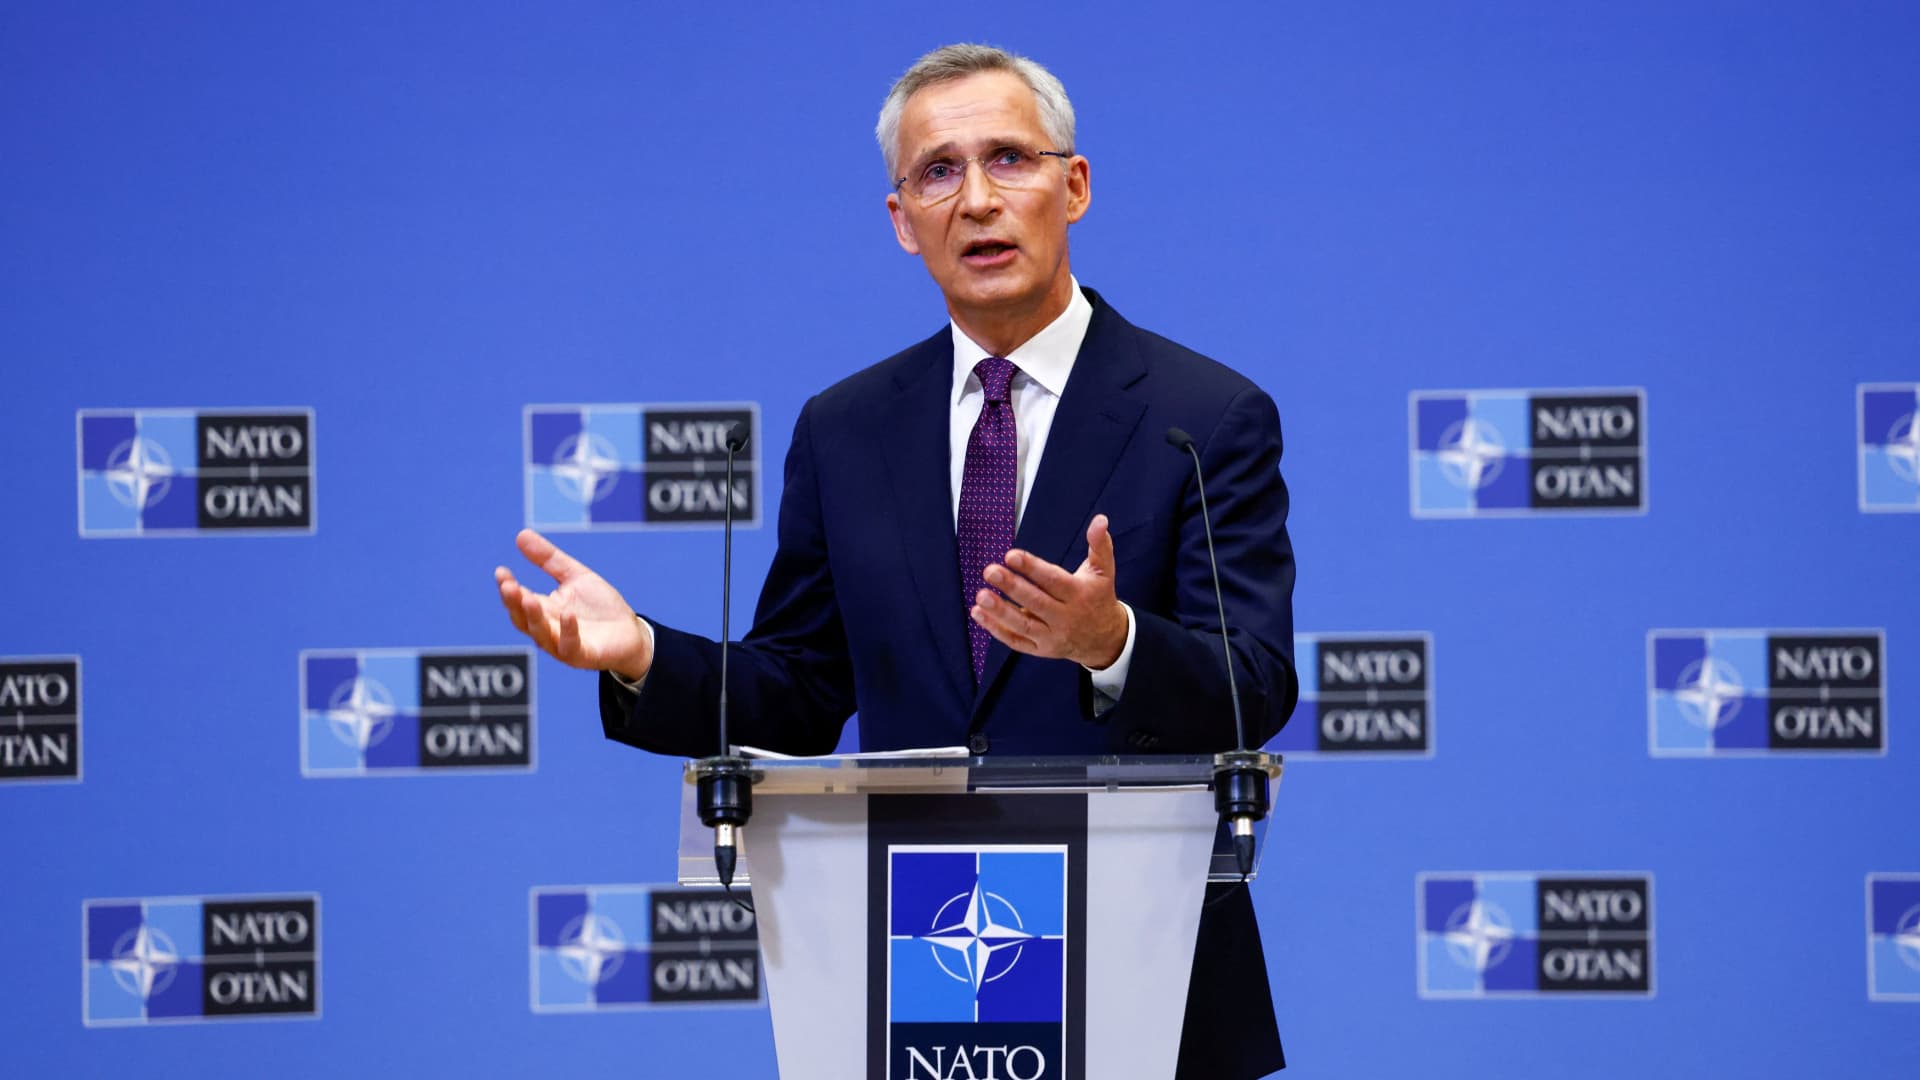 NATO chief Jens Stoltenberg has already previewed new moves by the alliance, announcing on Monday that it would increase its rapid response force and will bolster its battlegroups in eastern Europe.